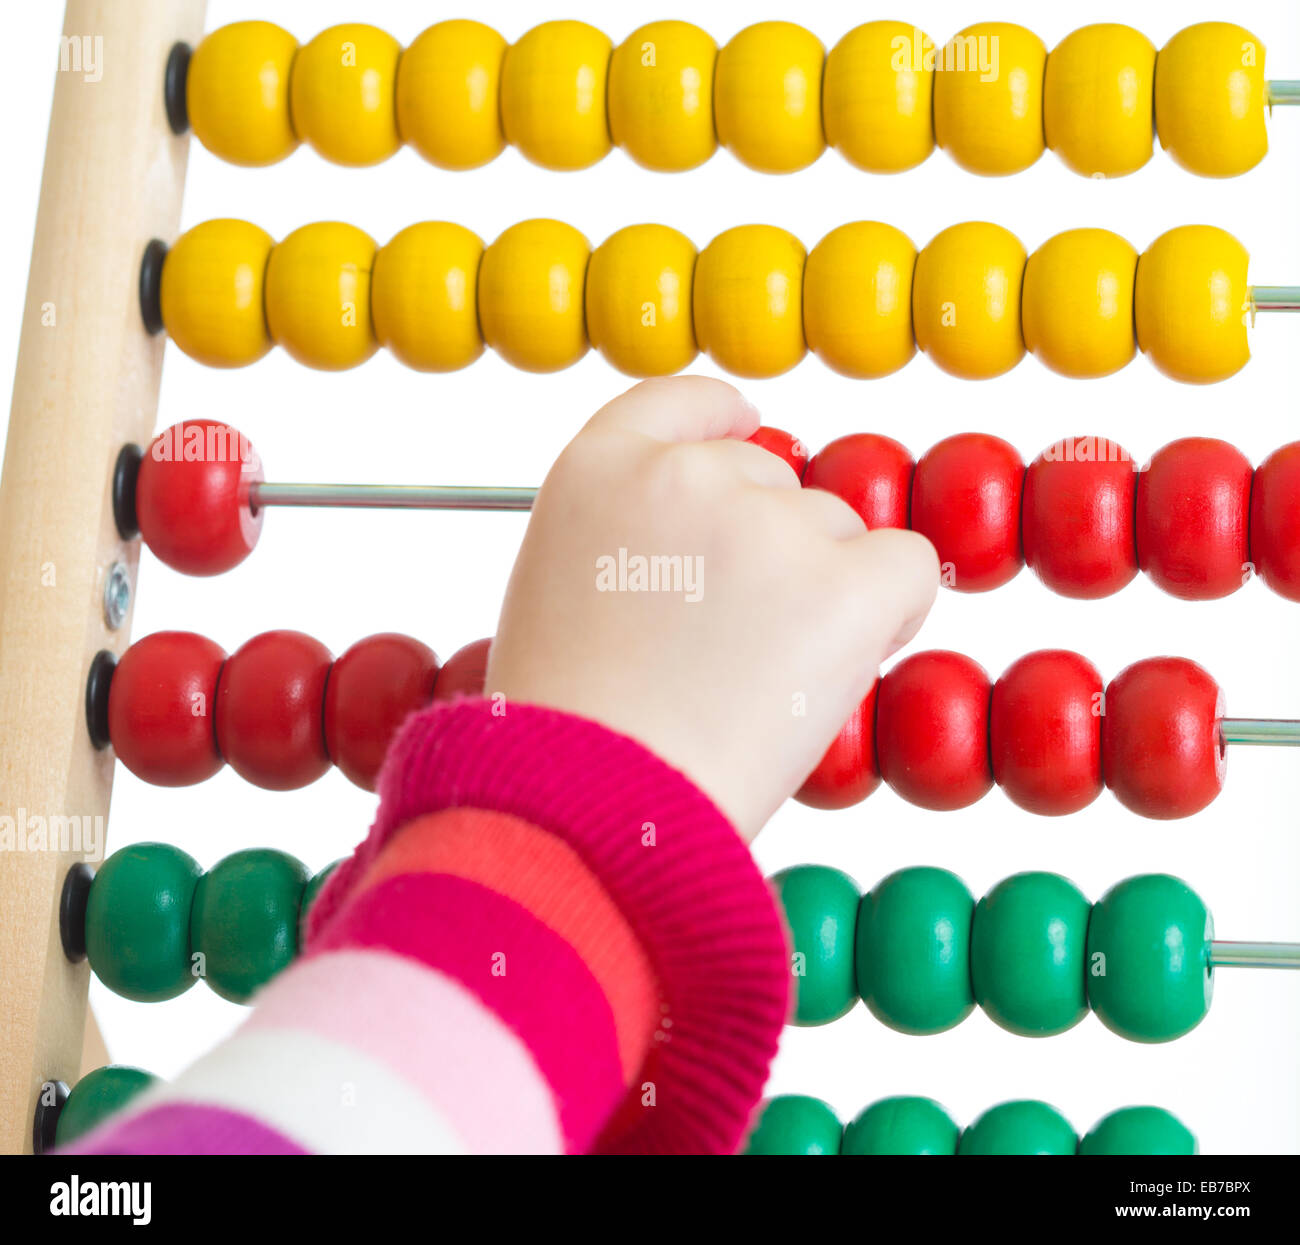 Child's hand counting on colorful abacus isolated Stock Photo